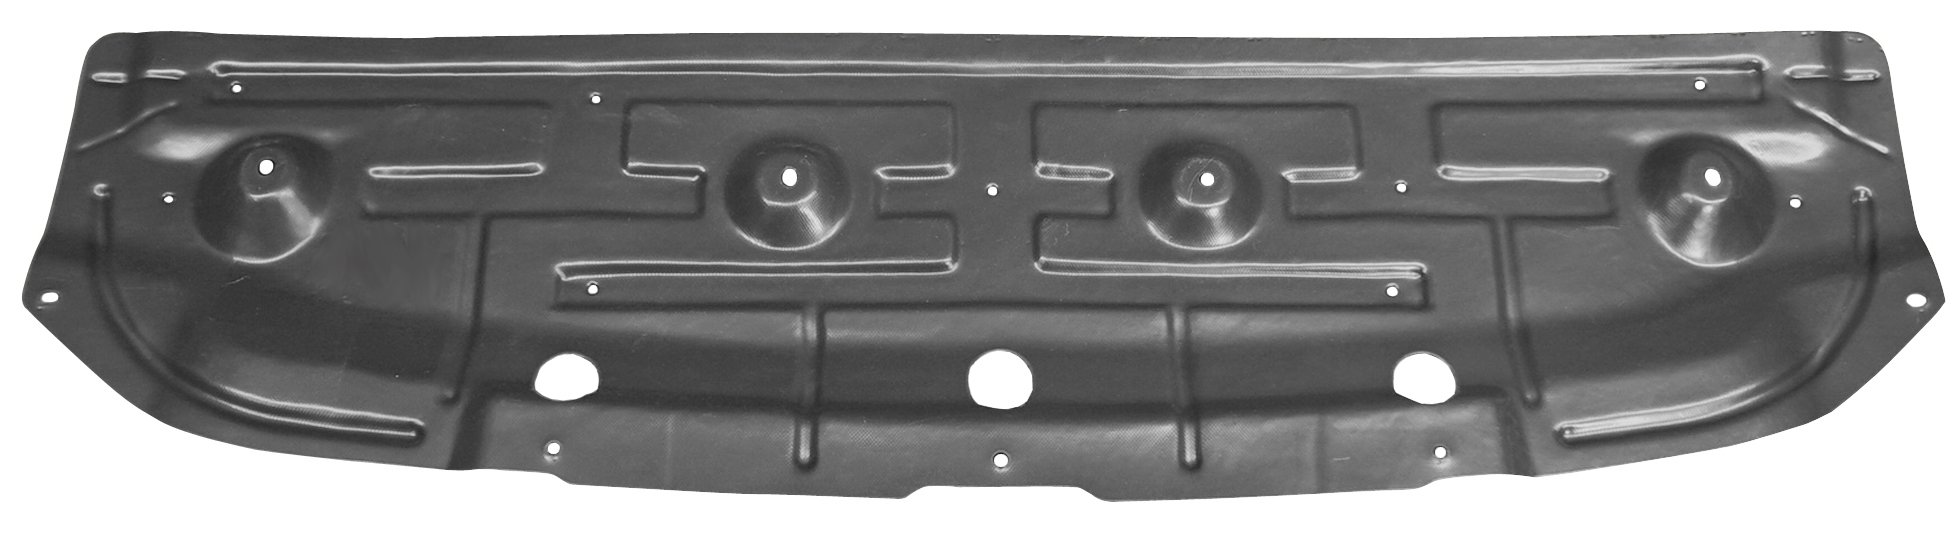 Aftermarket UNDER ENGINE COVERS for KIA - OPTIMA, OPTIMA,11-13,Lower engine cover